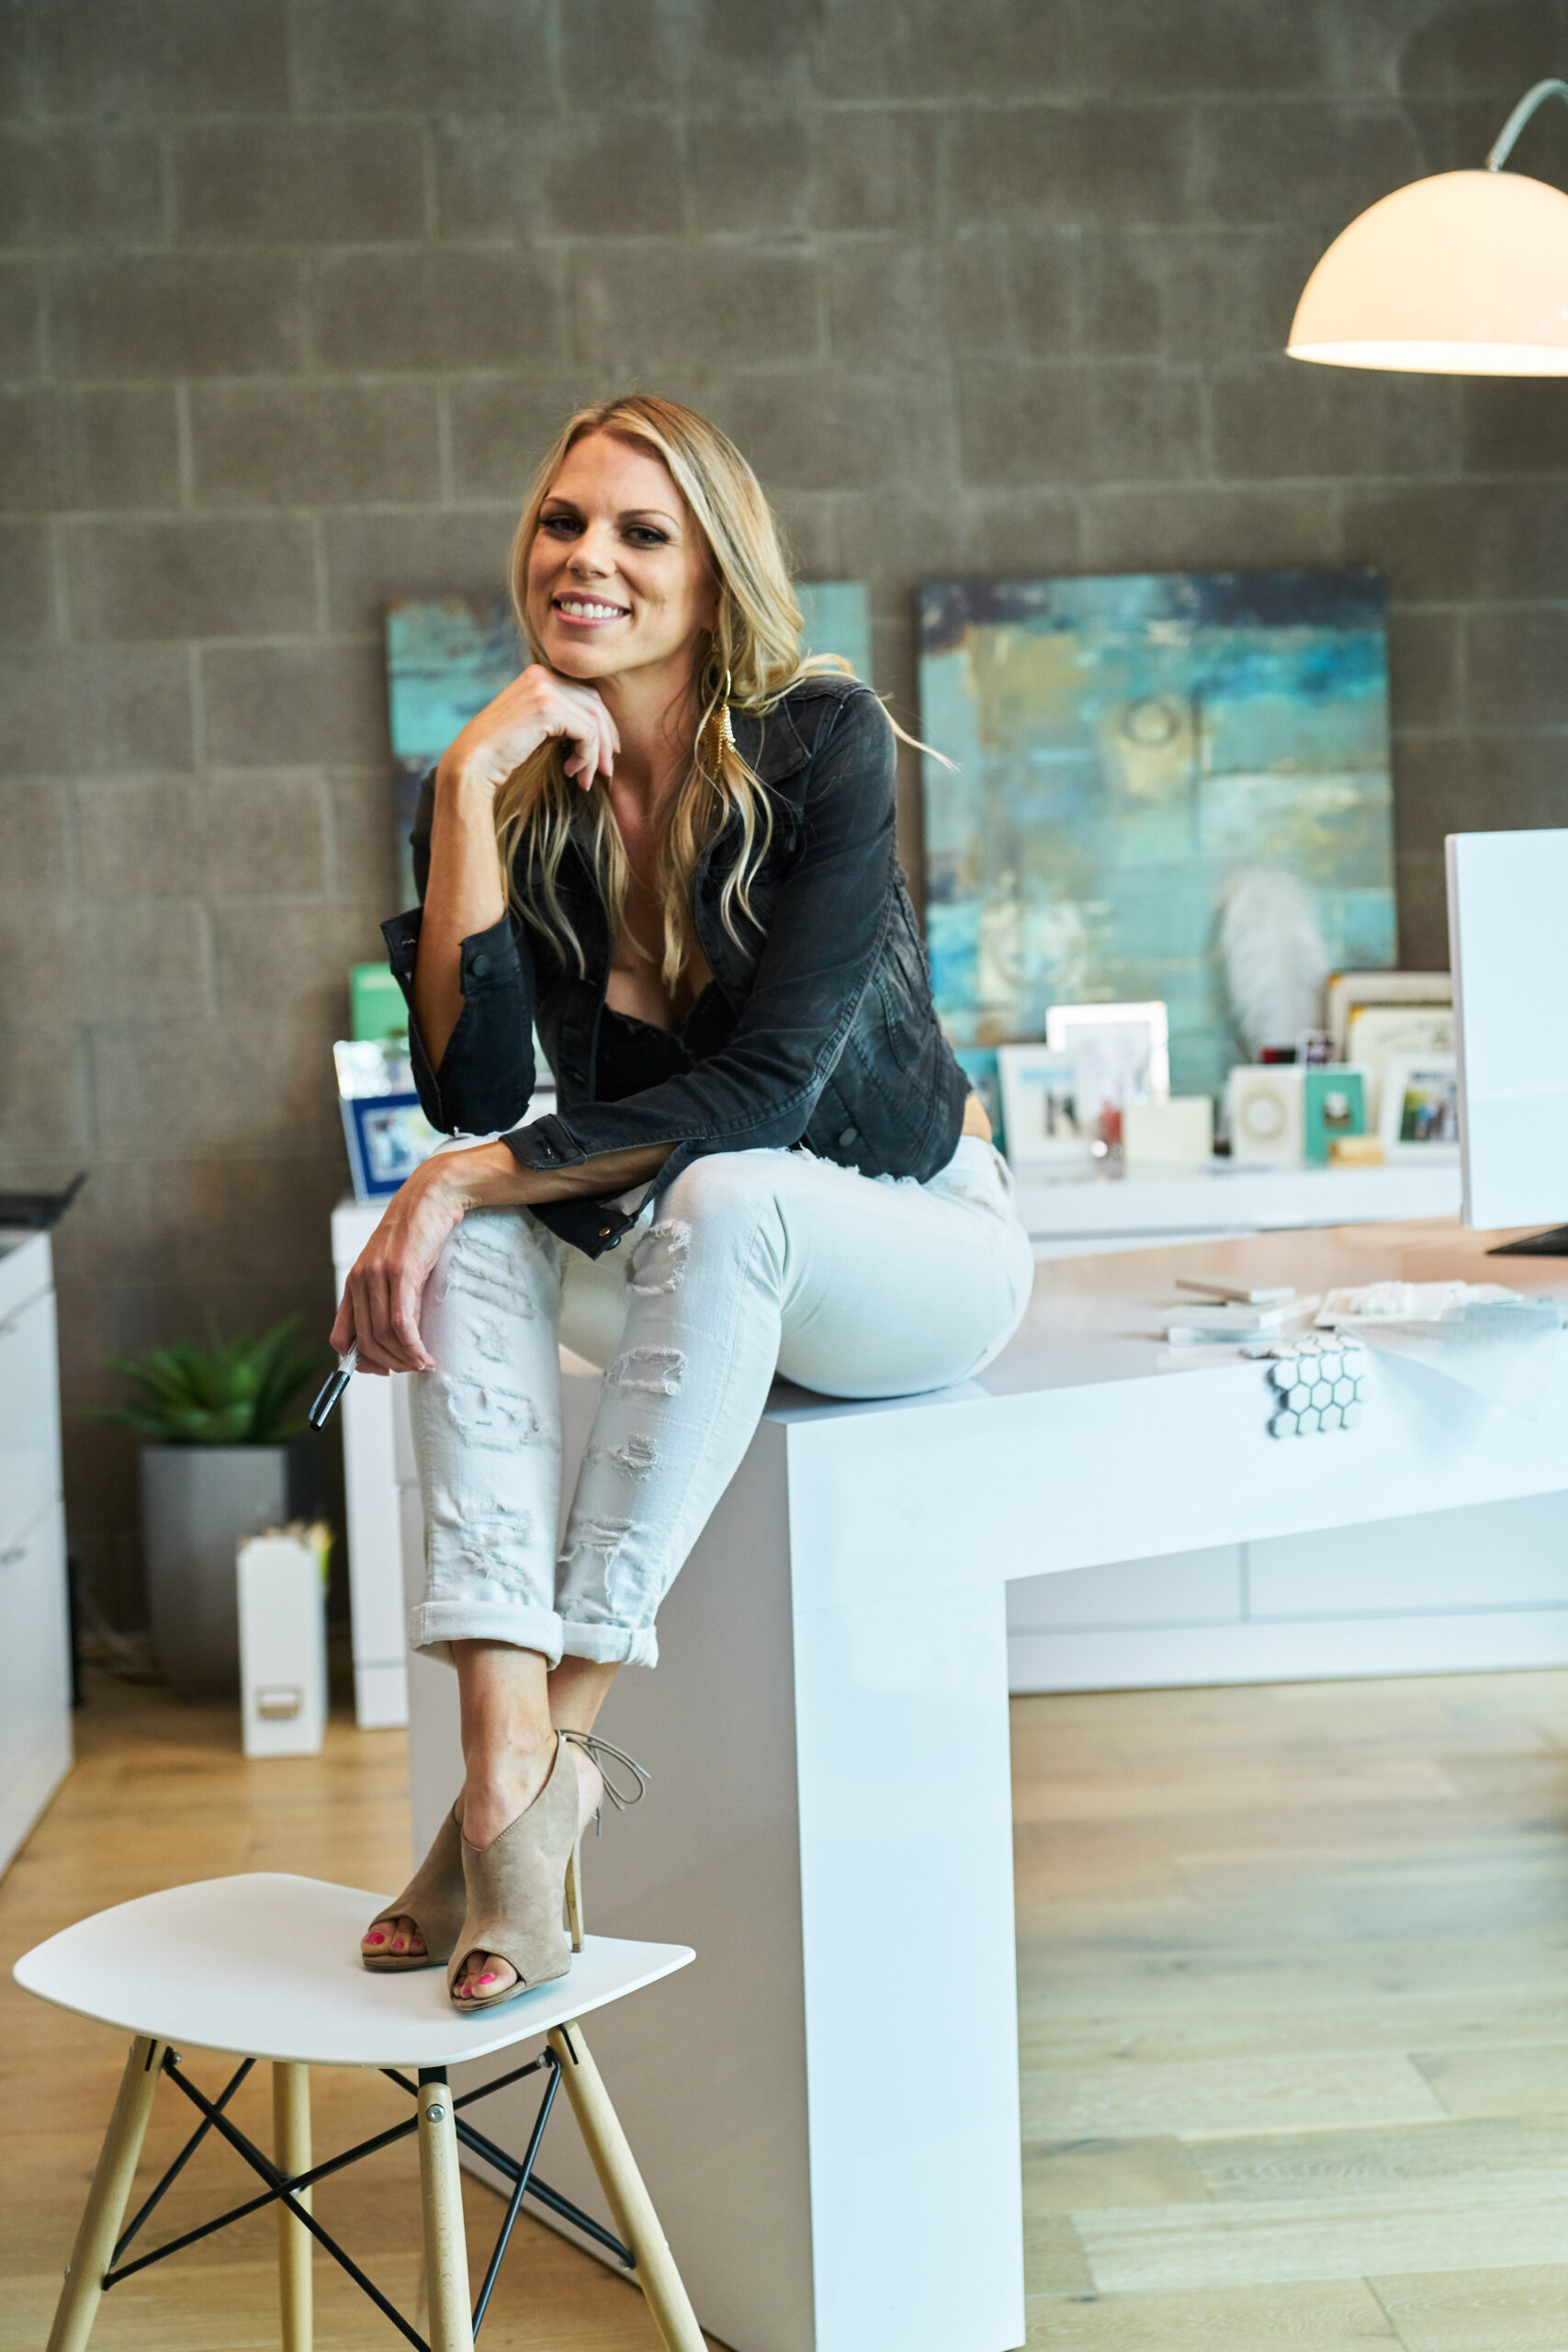 photo of blond woman with long hair leaning on her hand sitting on a table she is smiling and wearing a black shirt white pants and beige heels